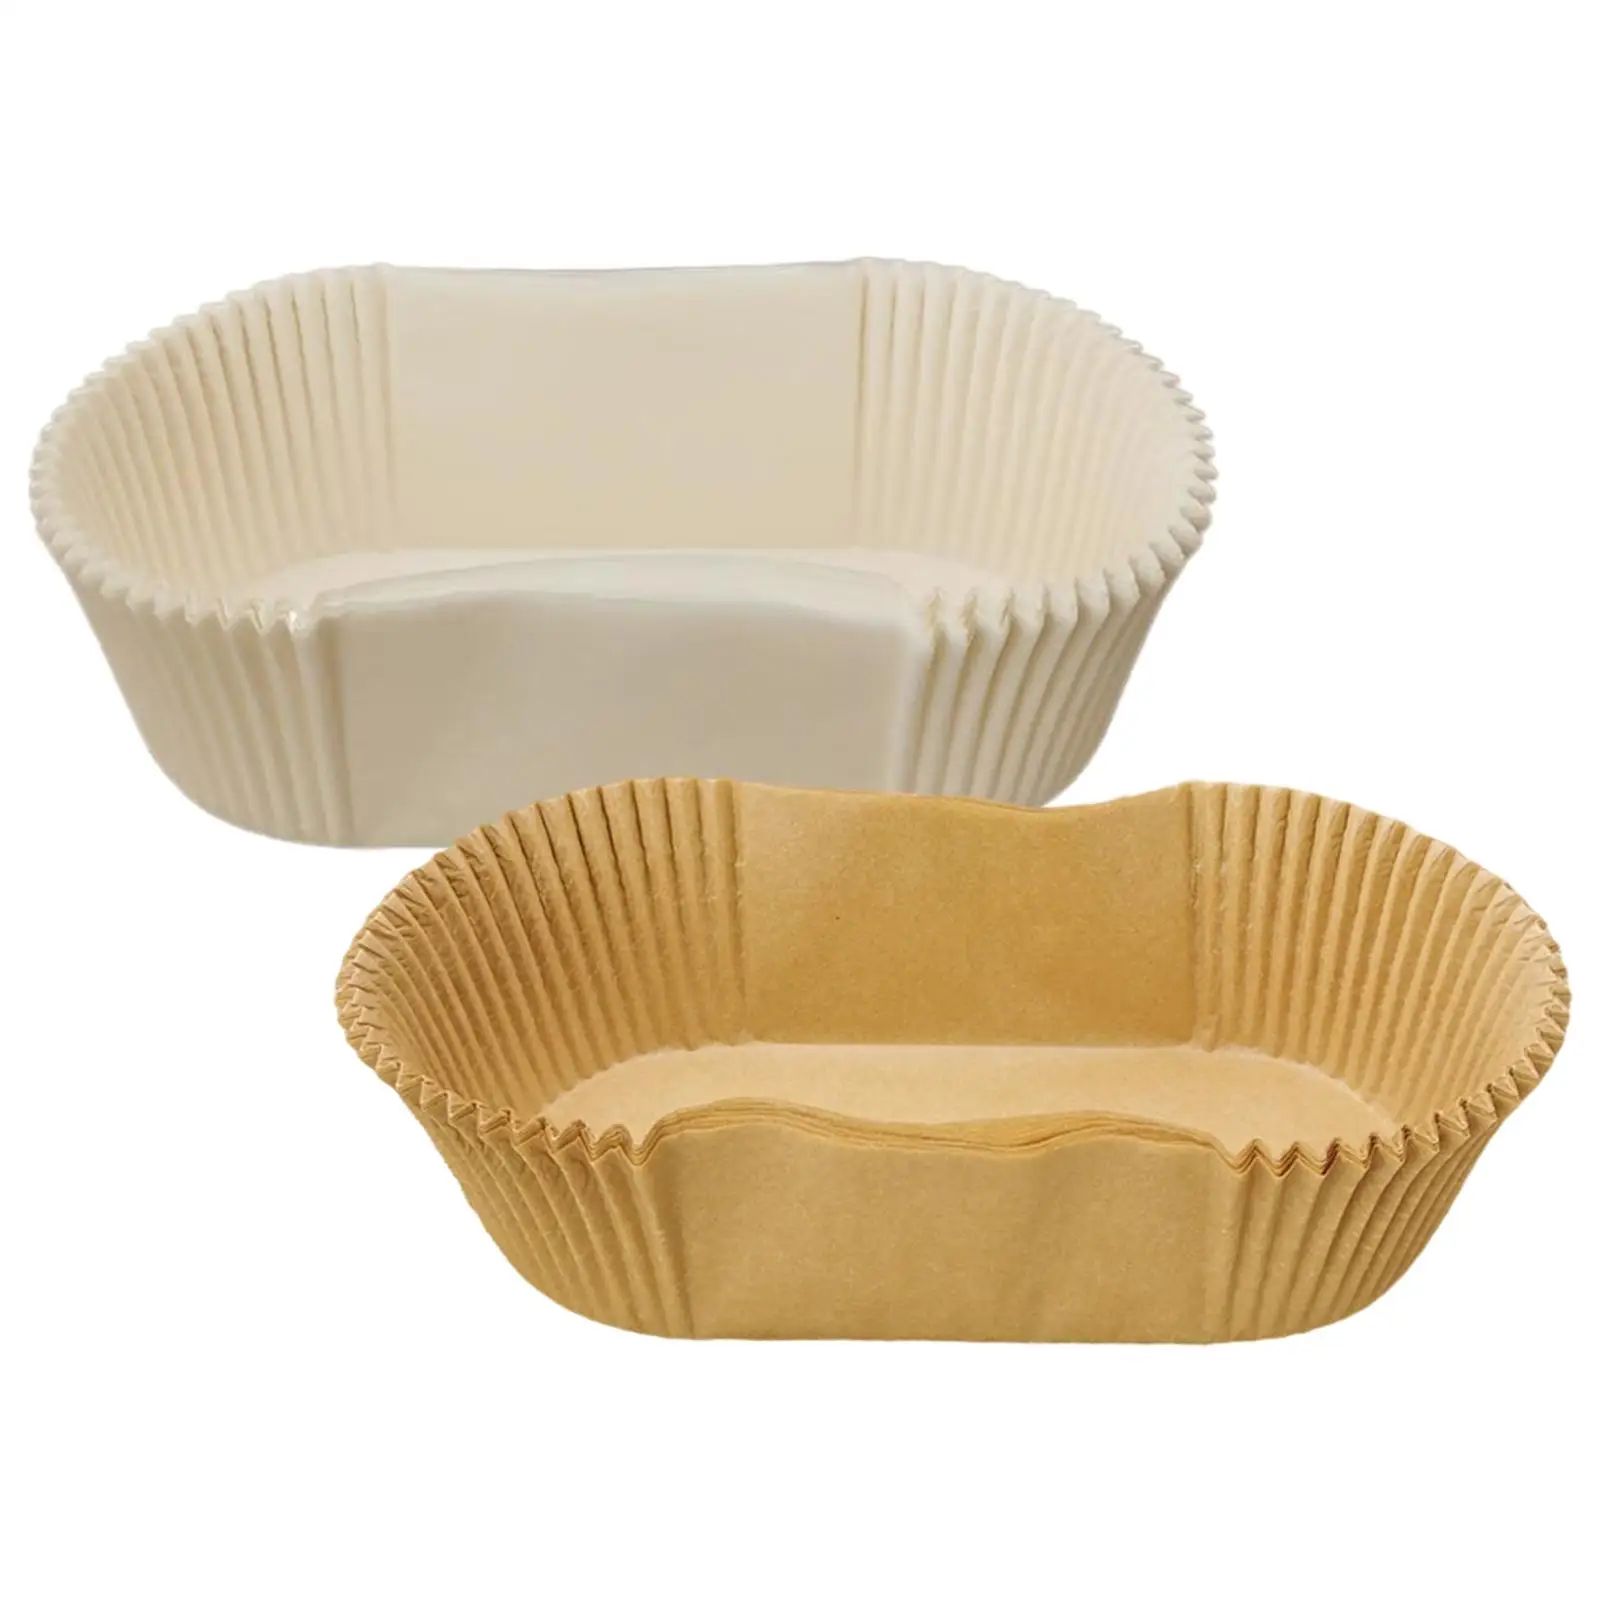 40 Pieces Paper Baking Cup Rectangle High Temperature for Dessert Cake Balls